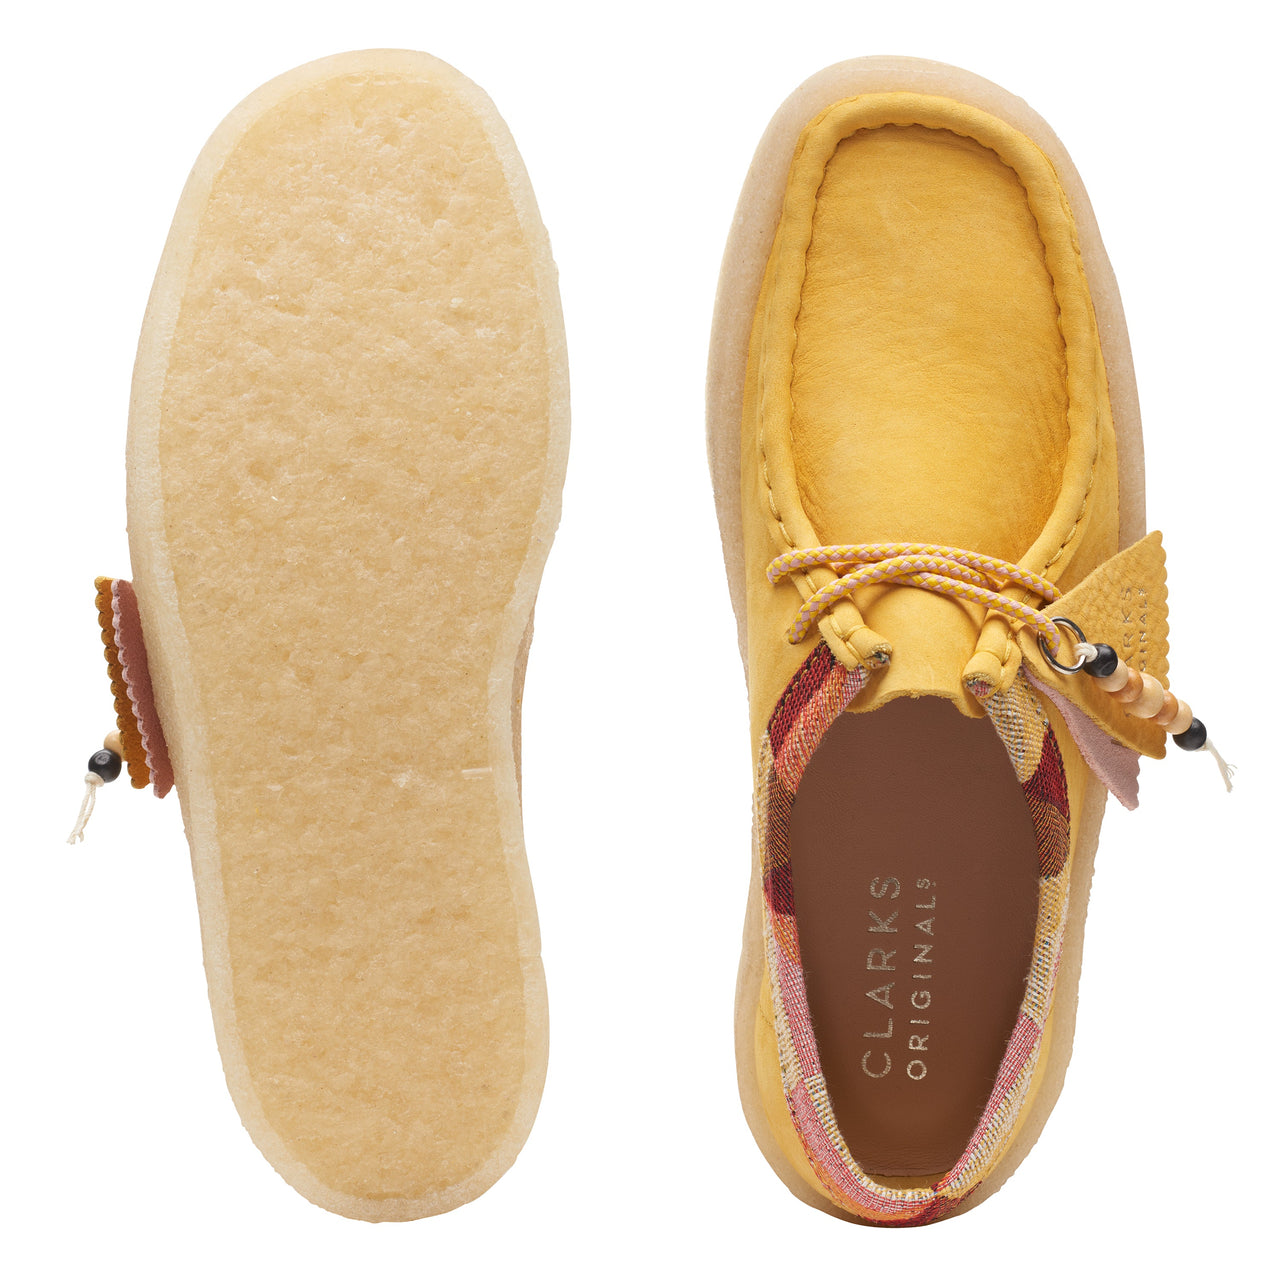  Elegant and practical Clarks Women Wallabee Cup Shoes in yellow nubuck for everyday wear